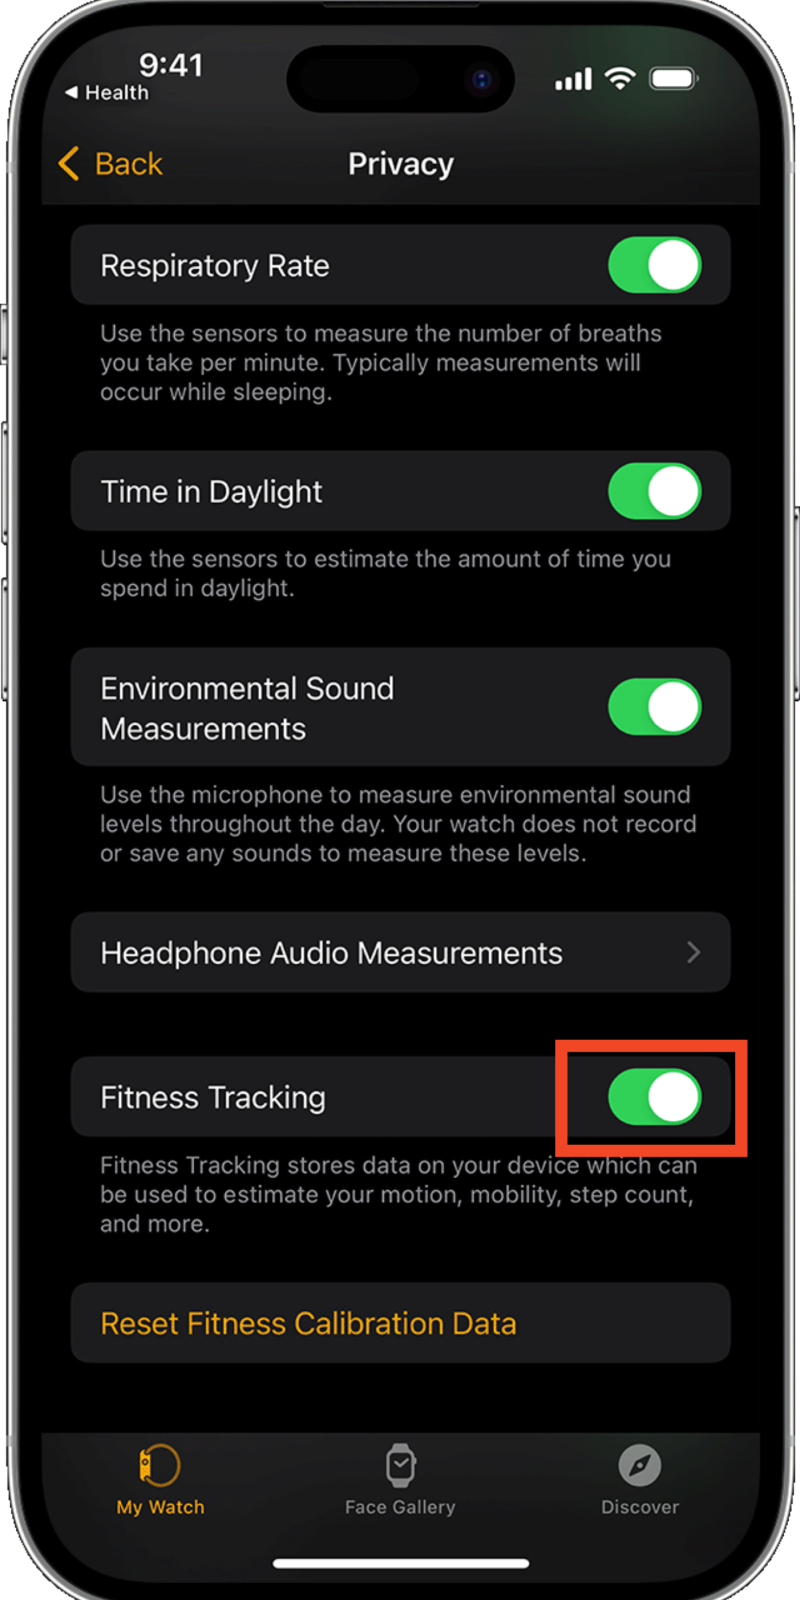 Fitness tracking option under Privacy settings on iPhone